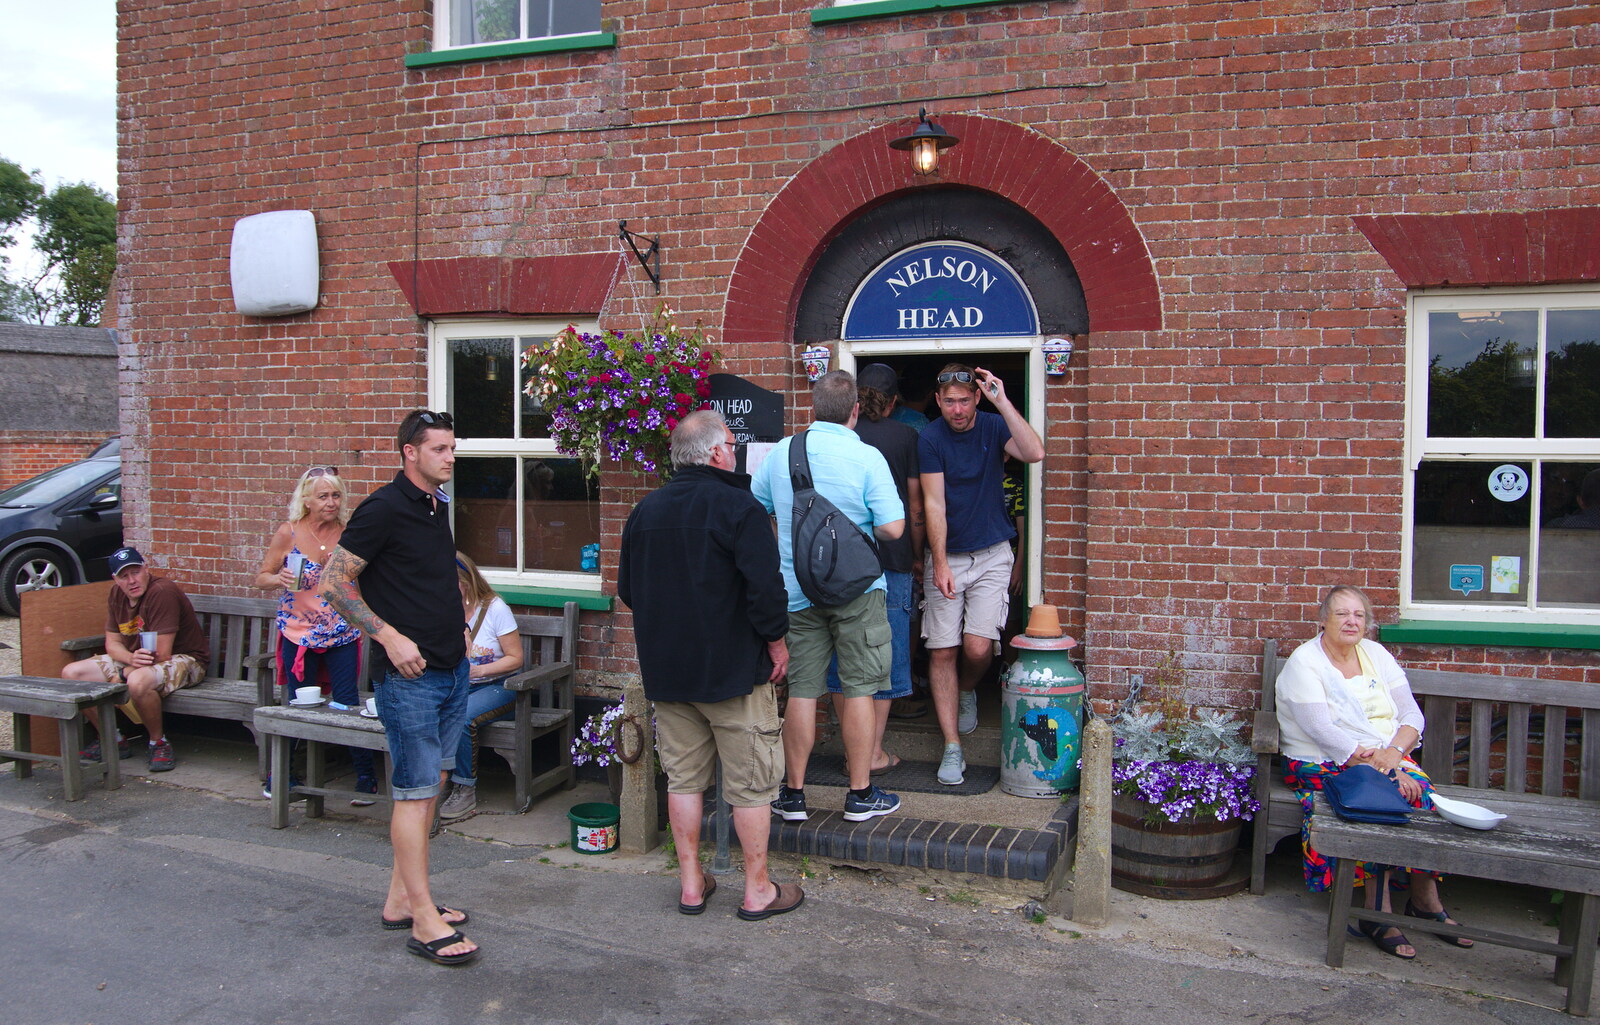 The queue for the bar is out on the street from Waxham Sands and the Nelson Head Beer Festival, Horsey, Norfolk - 31st August 2019